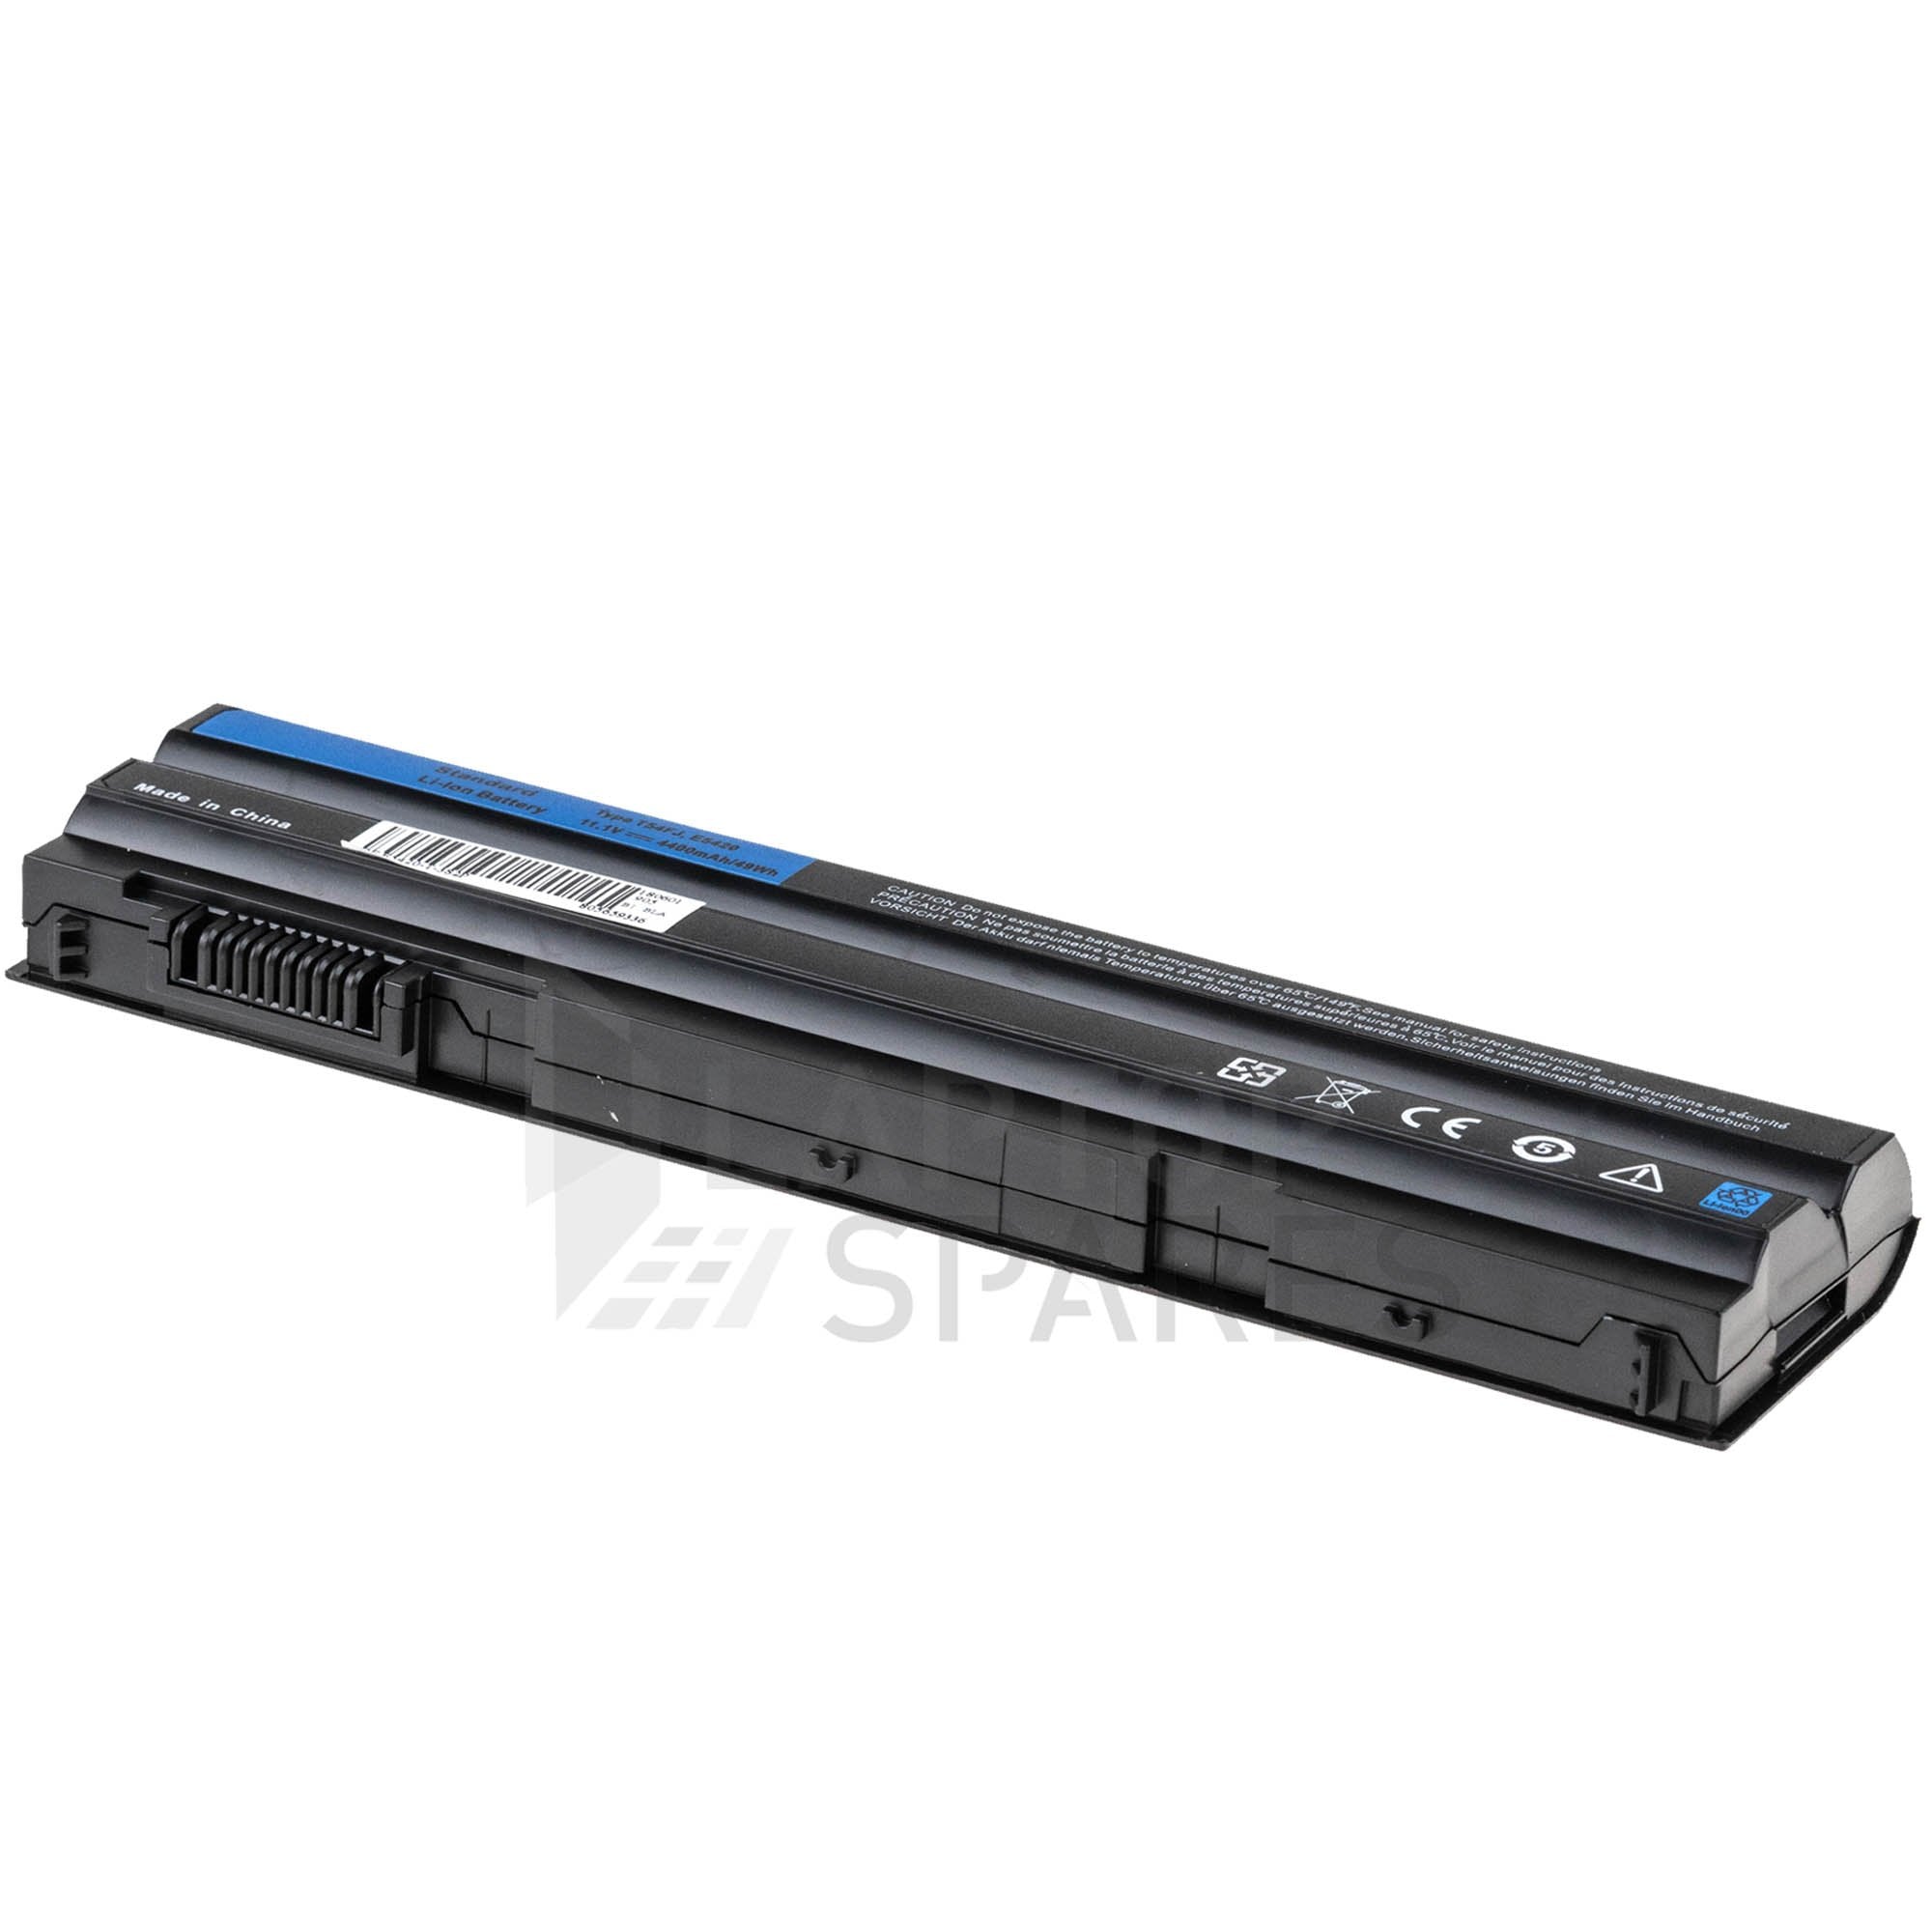 Dell Inspiron 74 75 77 6 Cell Laptop Battery In Pakistan Laptop Spares